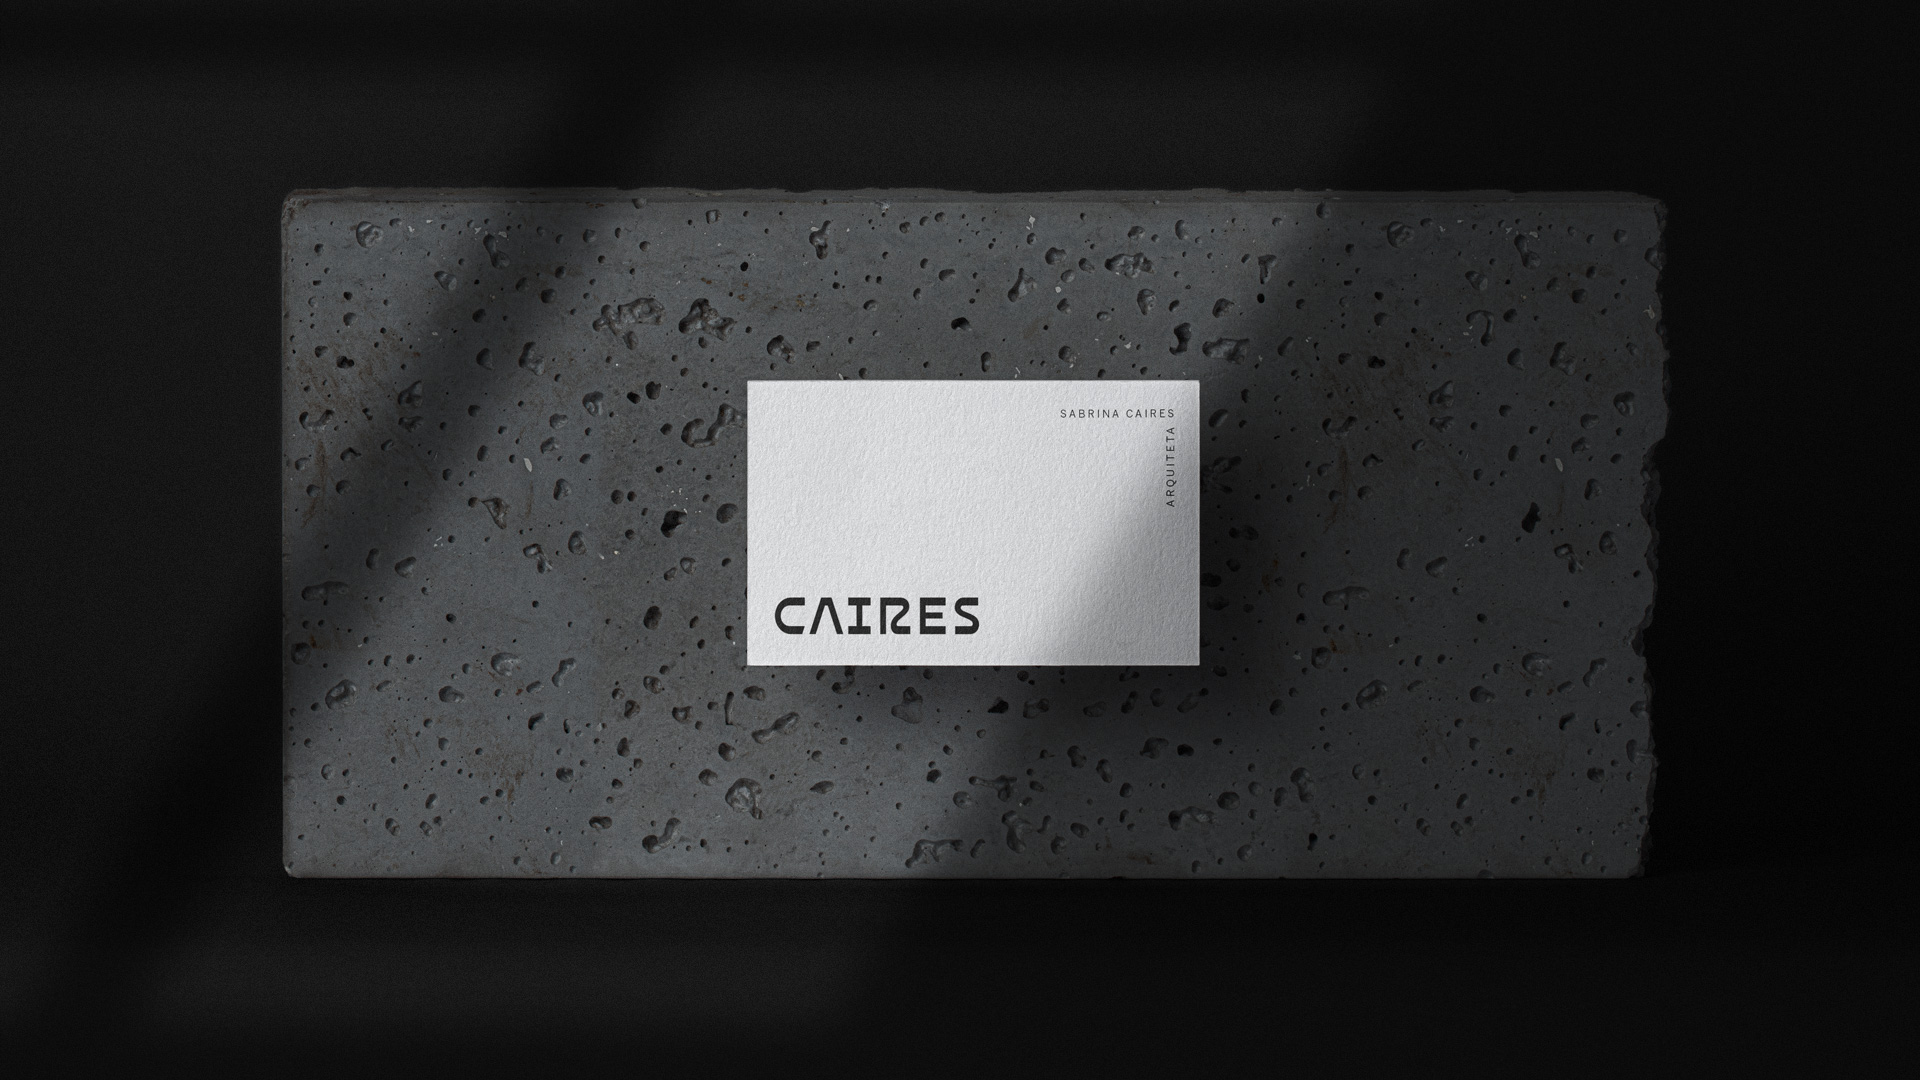 Caires Brand Identity By Vitor Linhares